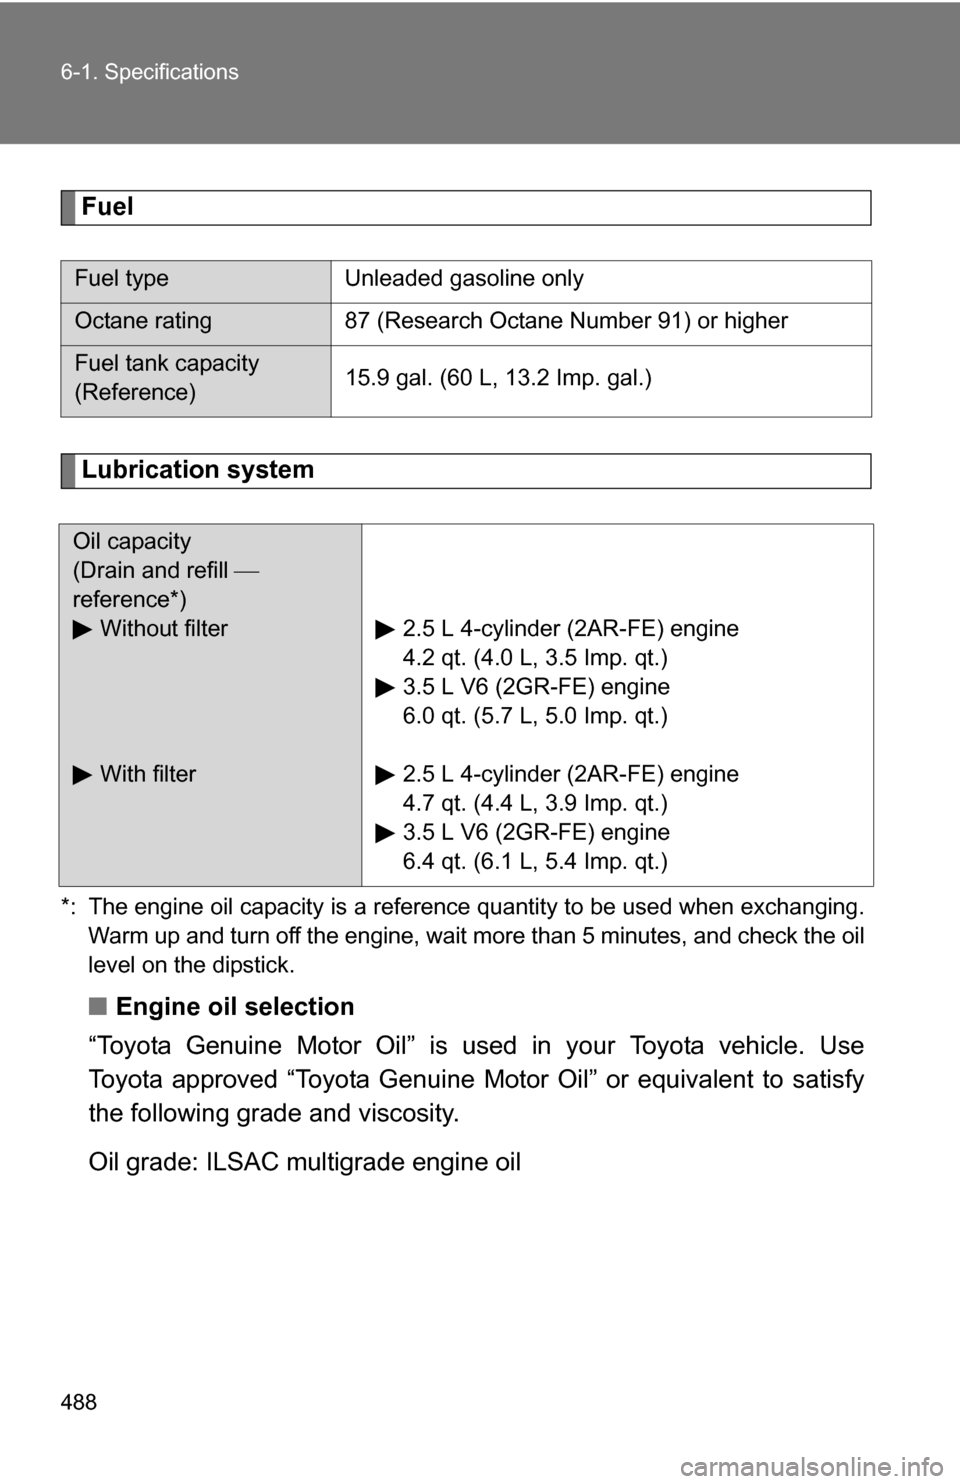 TOYOTA RAV4 2012 XA30 / 3.G Owners Manual 488 6-1. Specifications
Fuel
Lubrication system
*: The engine oil capacity is a reference quantity to be used when exchanging.Warm up and turn off the engine, wait more than 5 minutes, and check the o